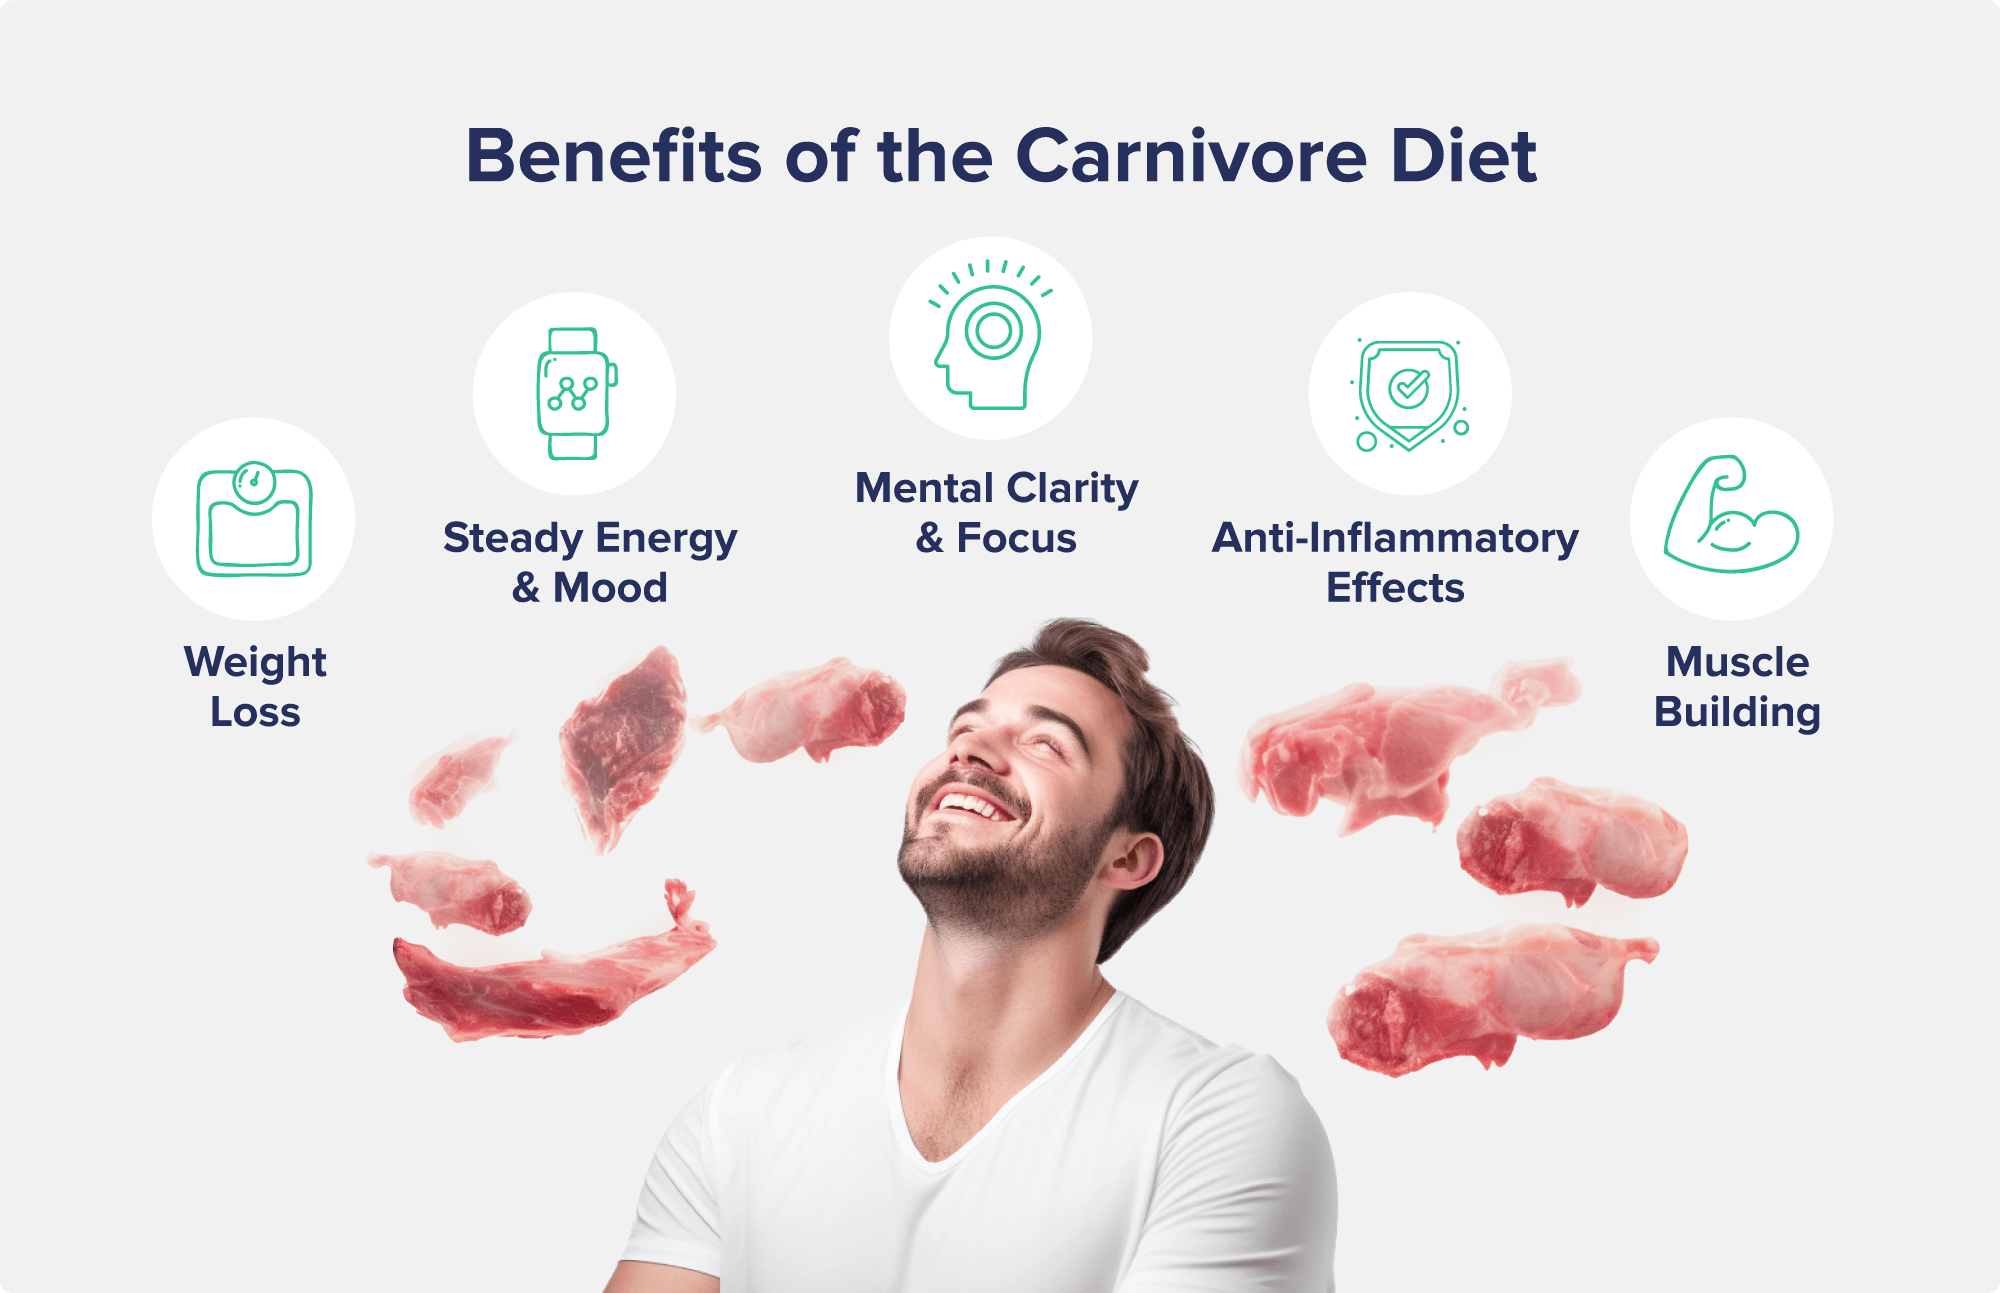 An image entitled "Benefits of the Carnivore Diet" showing a man surrounded by pieces of raw meat looking up at icons representing the benefits